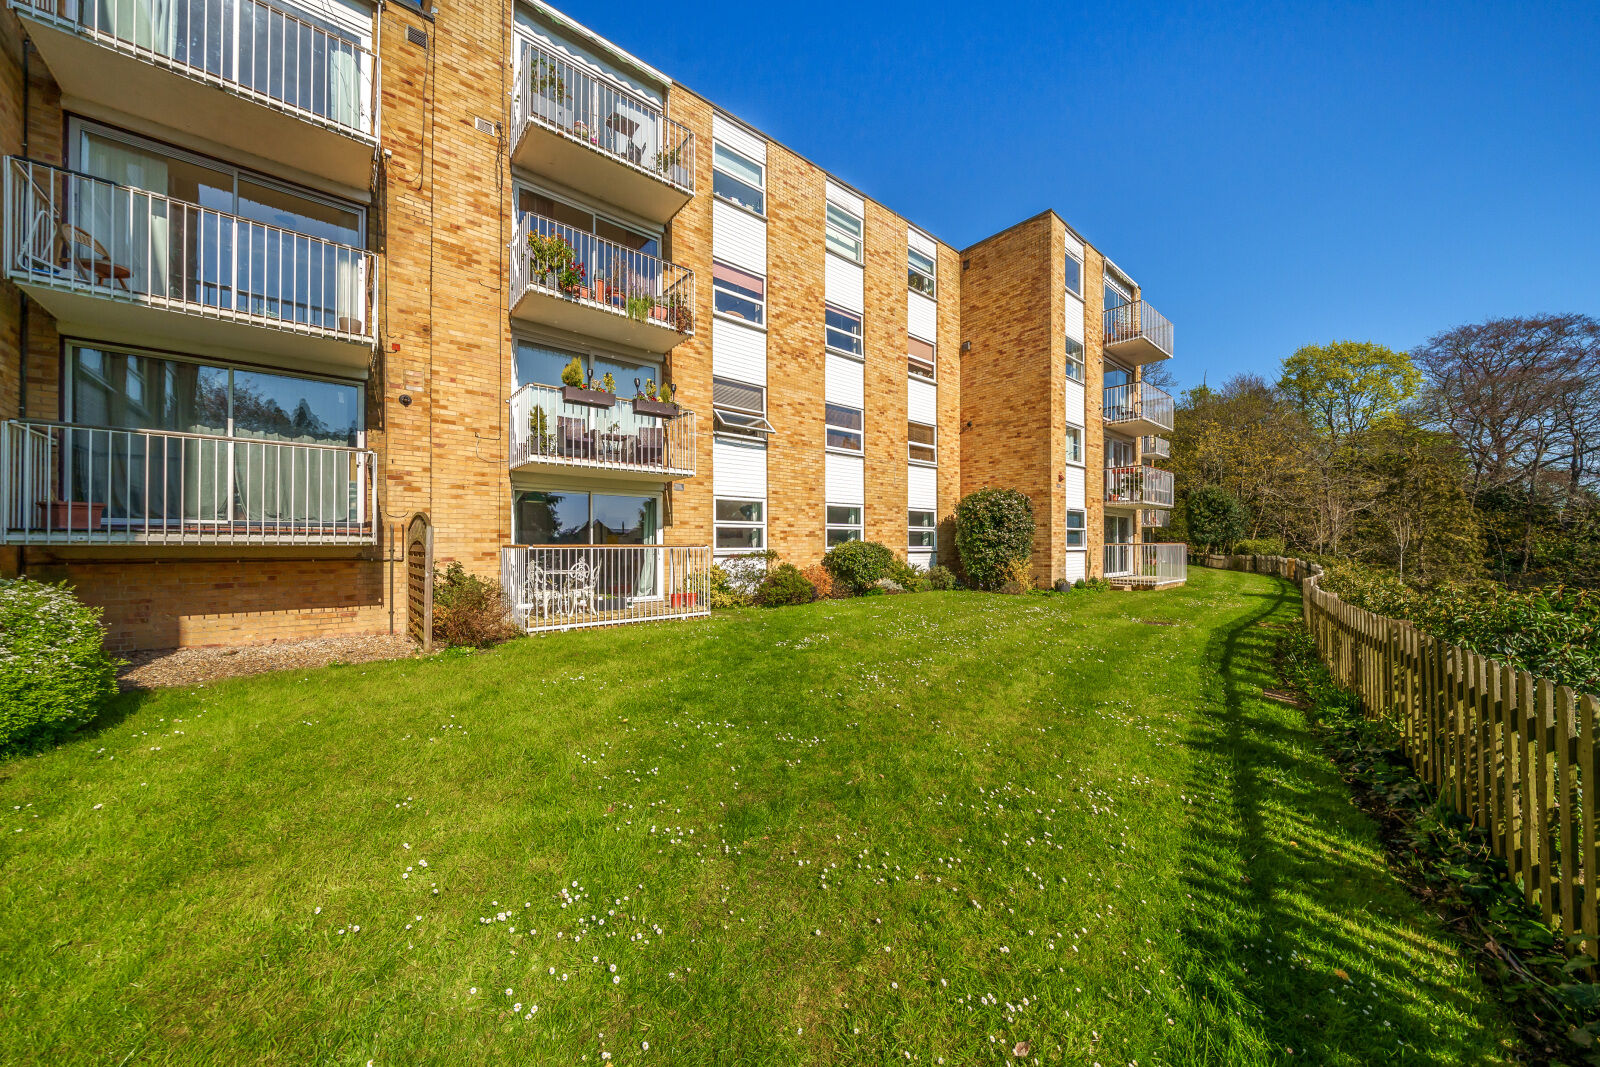 2 bedroom  flat for sale Beech House, Ancastle Green, RG9, main image